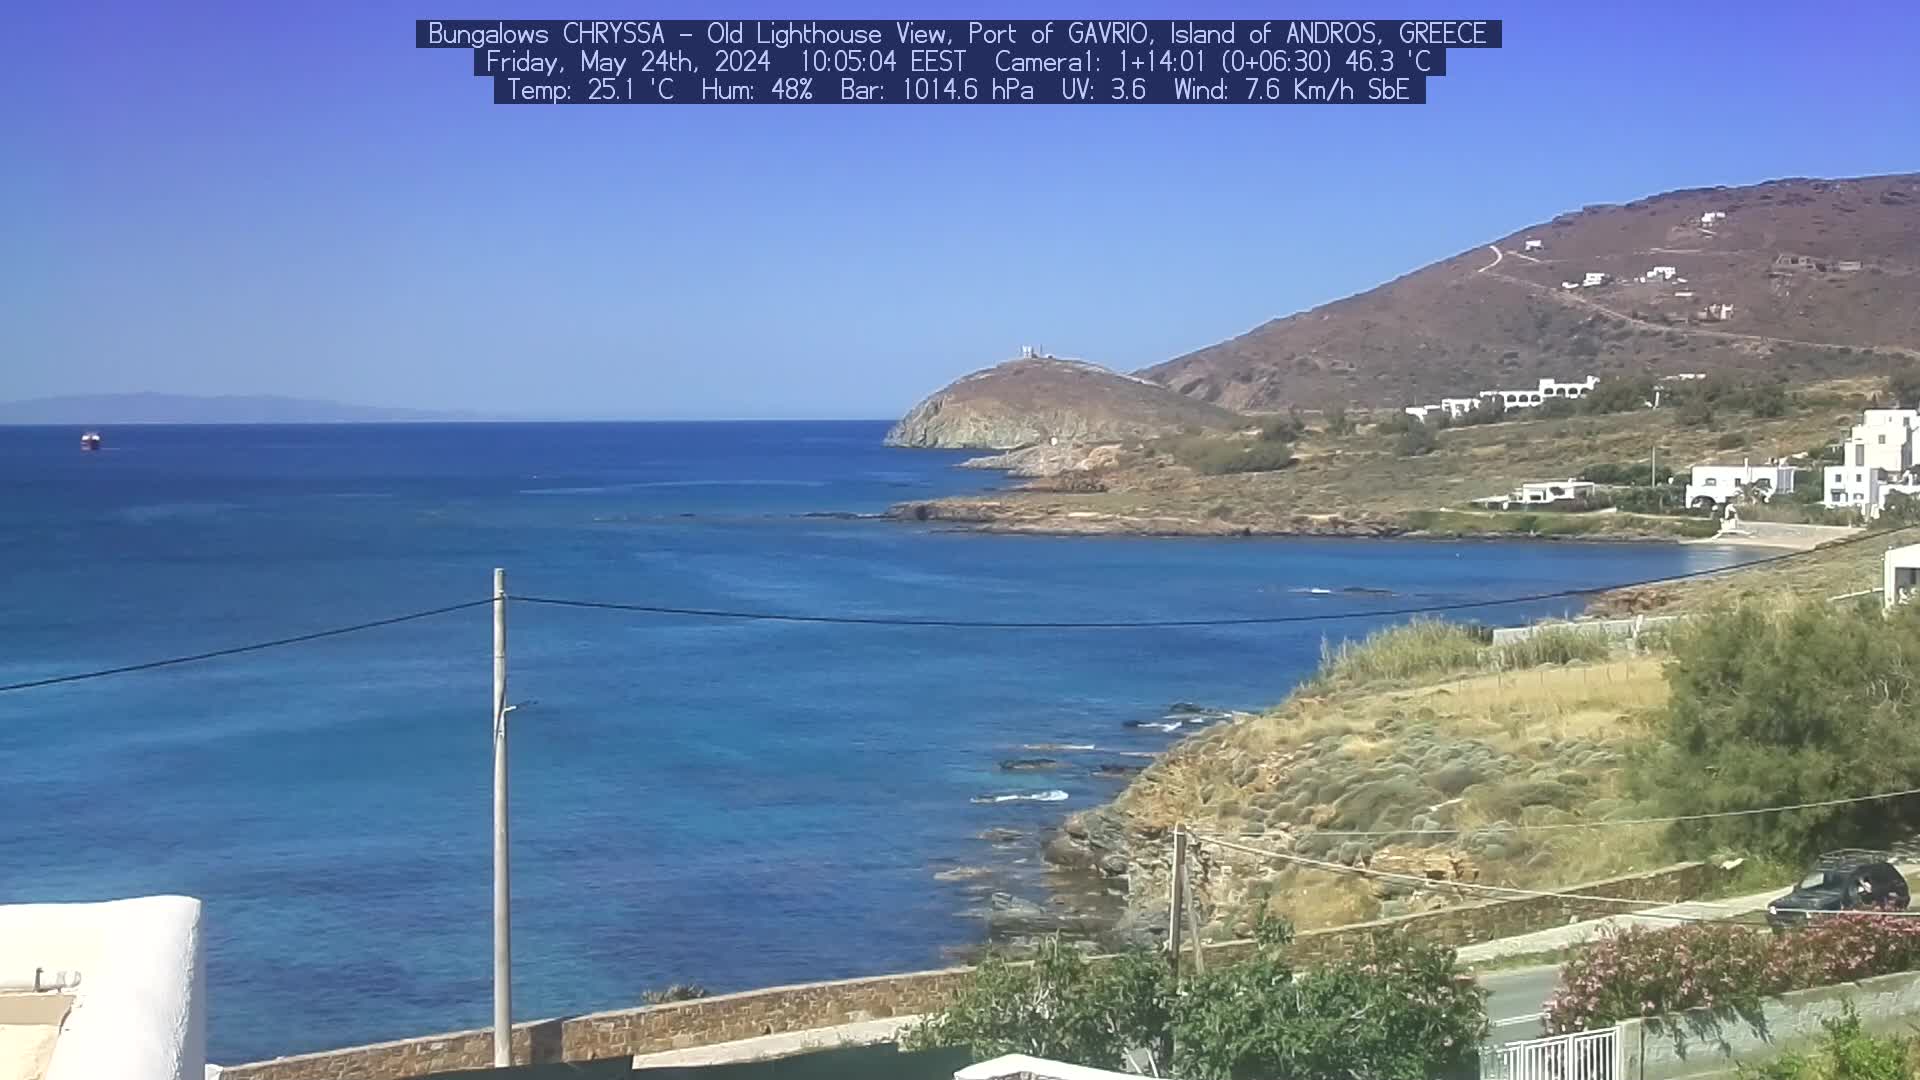 Gavrio (Andros) Wed. 10:05